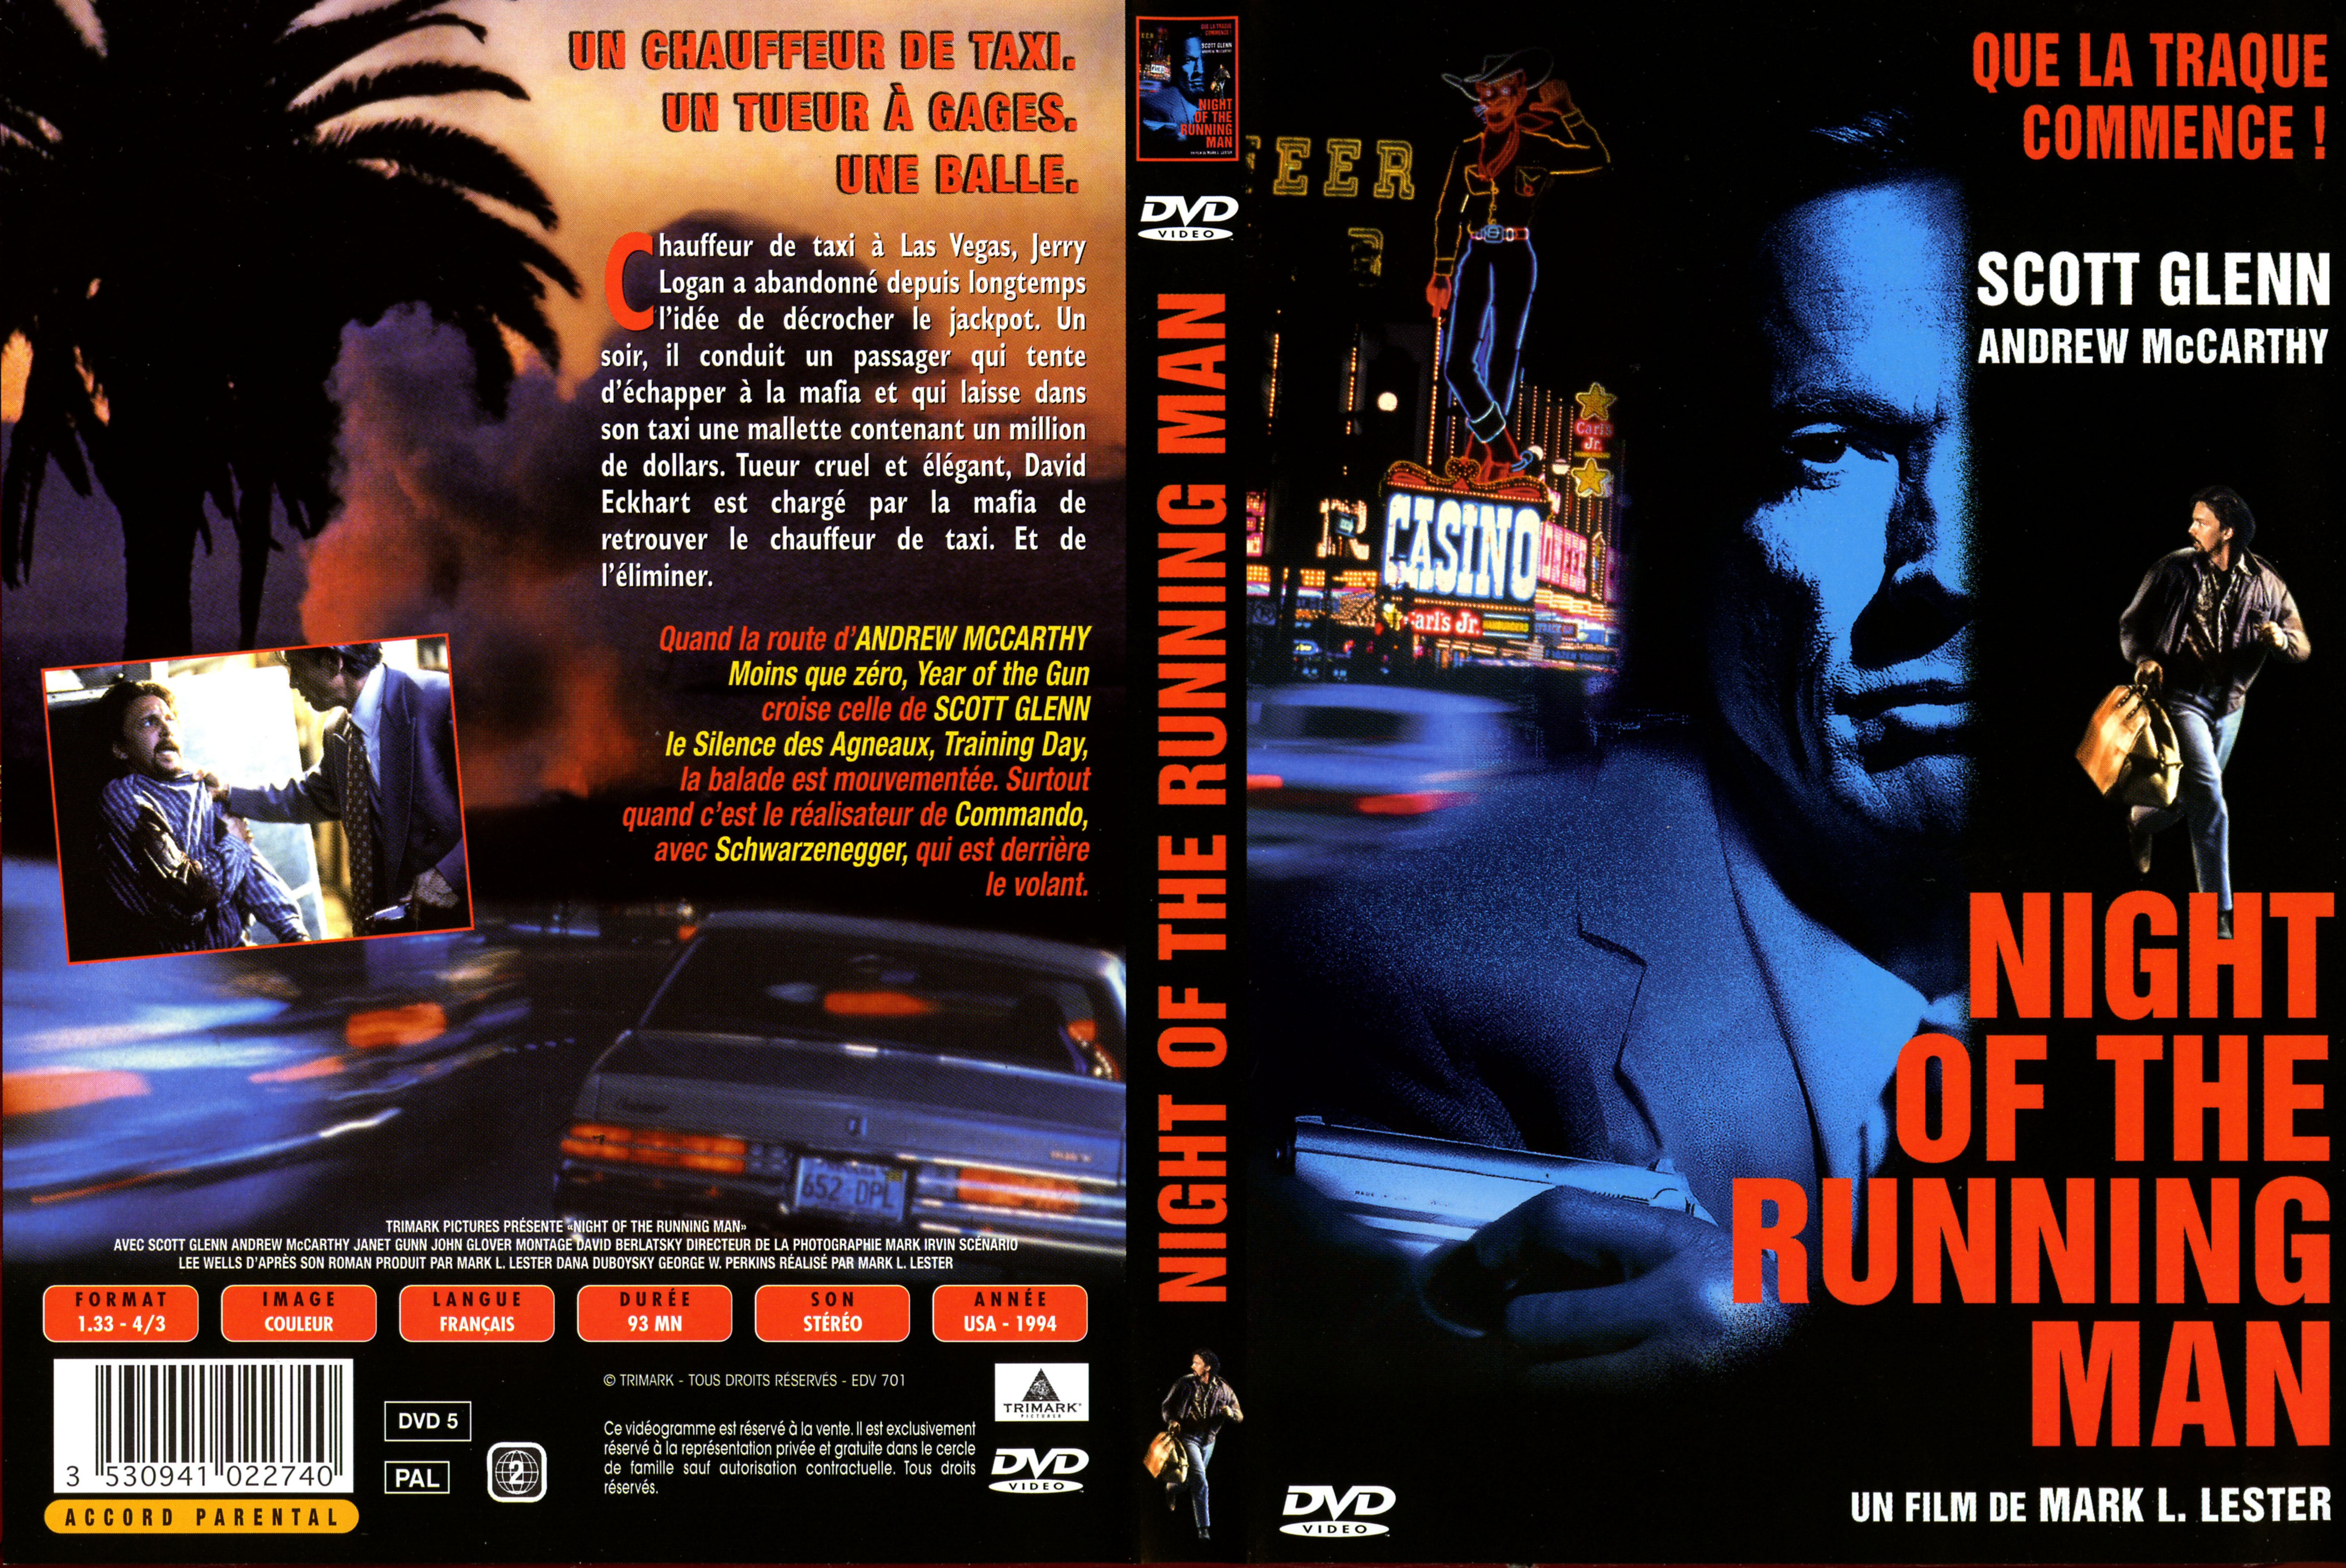 Jaquette DVD Night of the running man